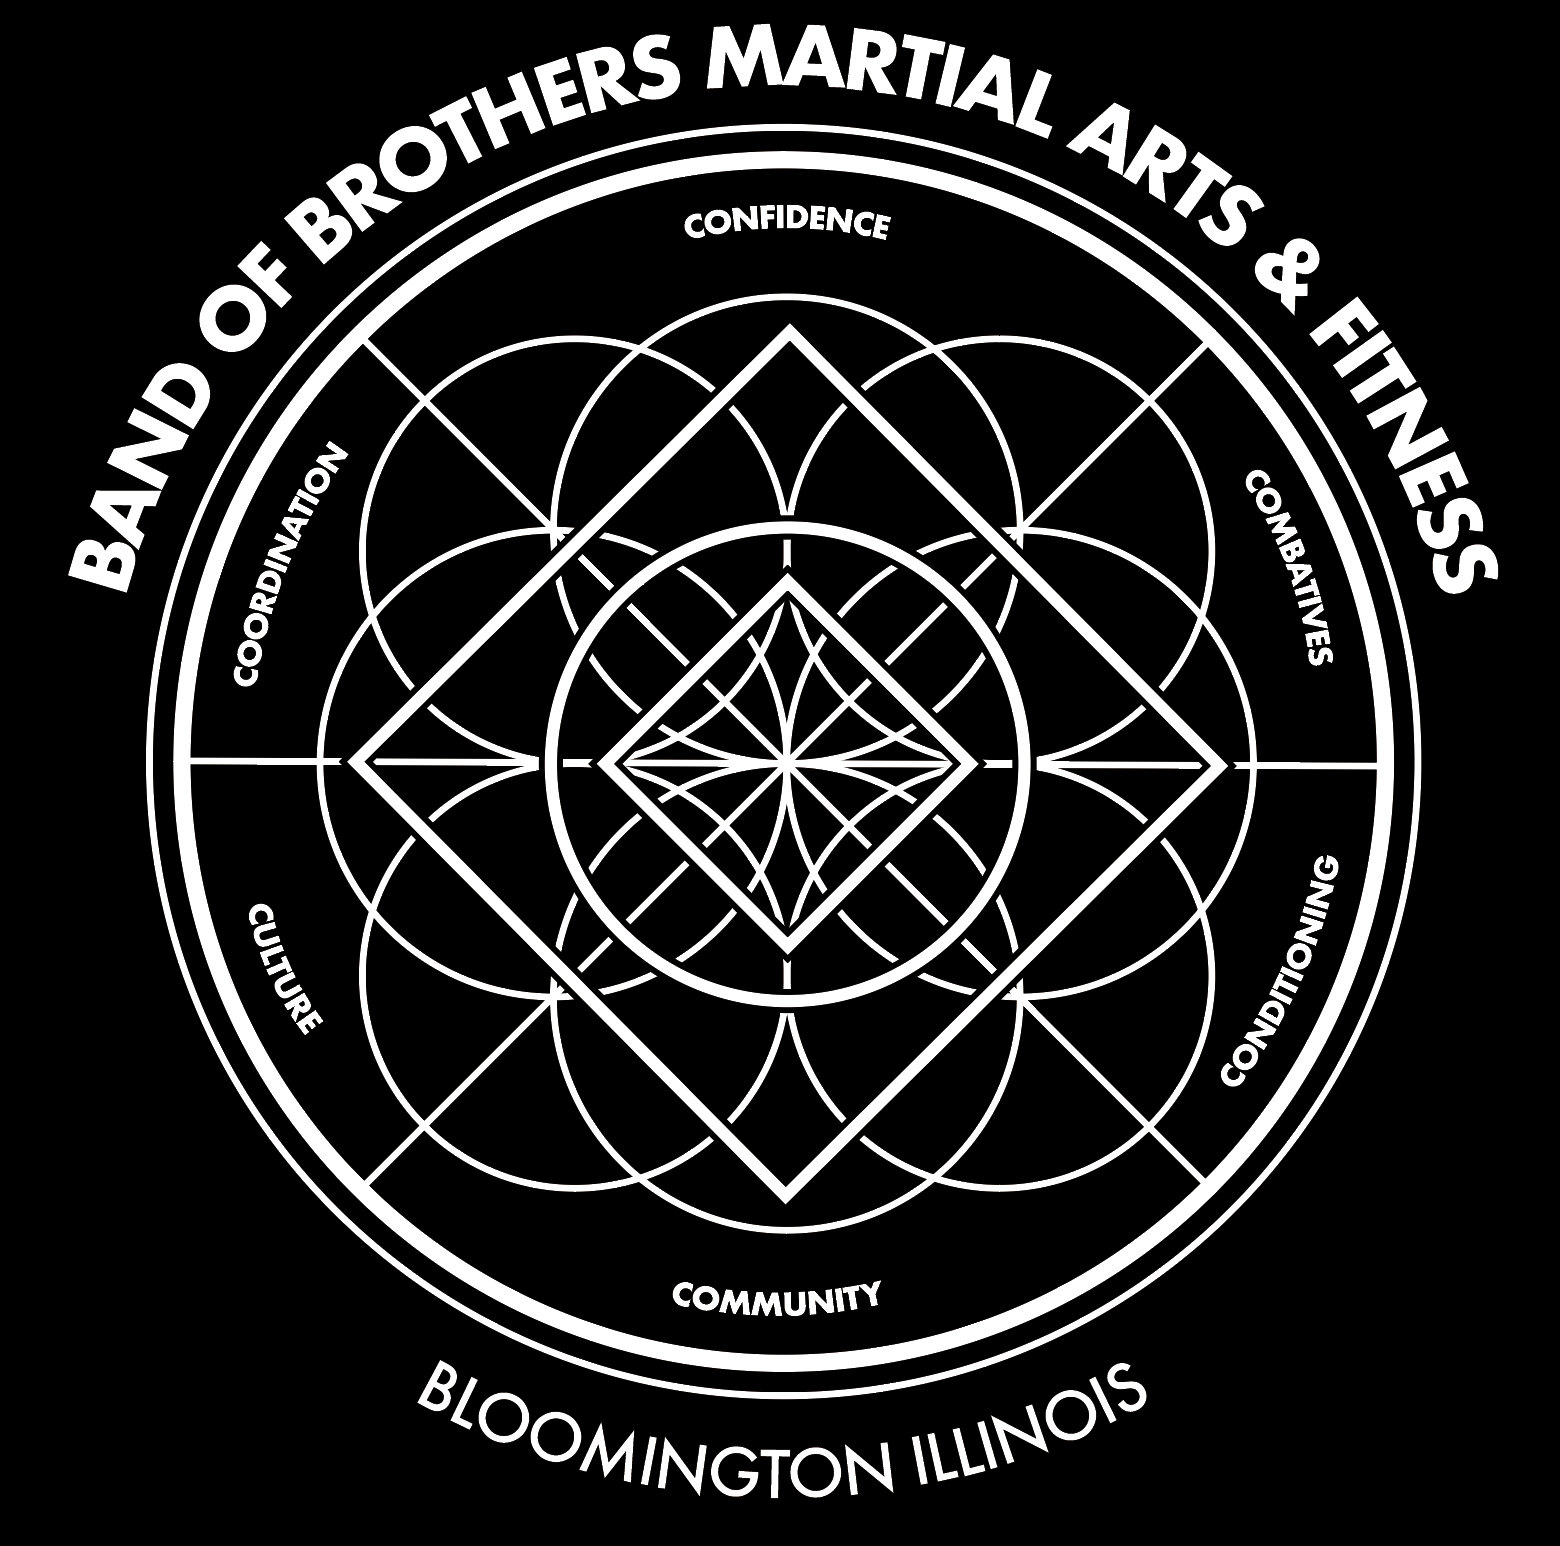 Band of Brothers Martial Arts and Fitness